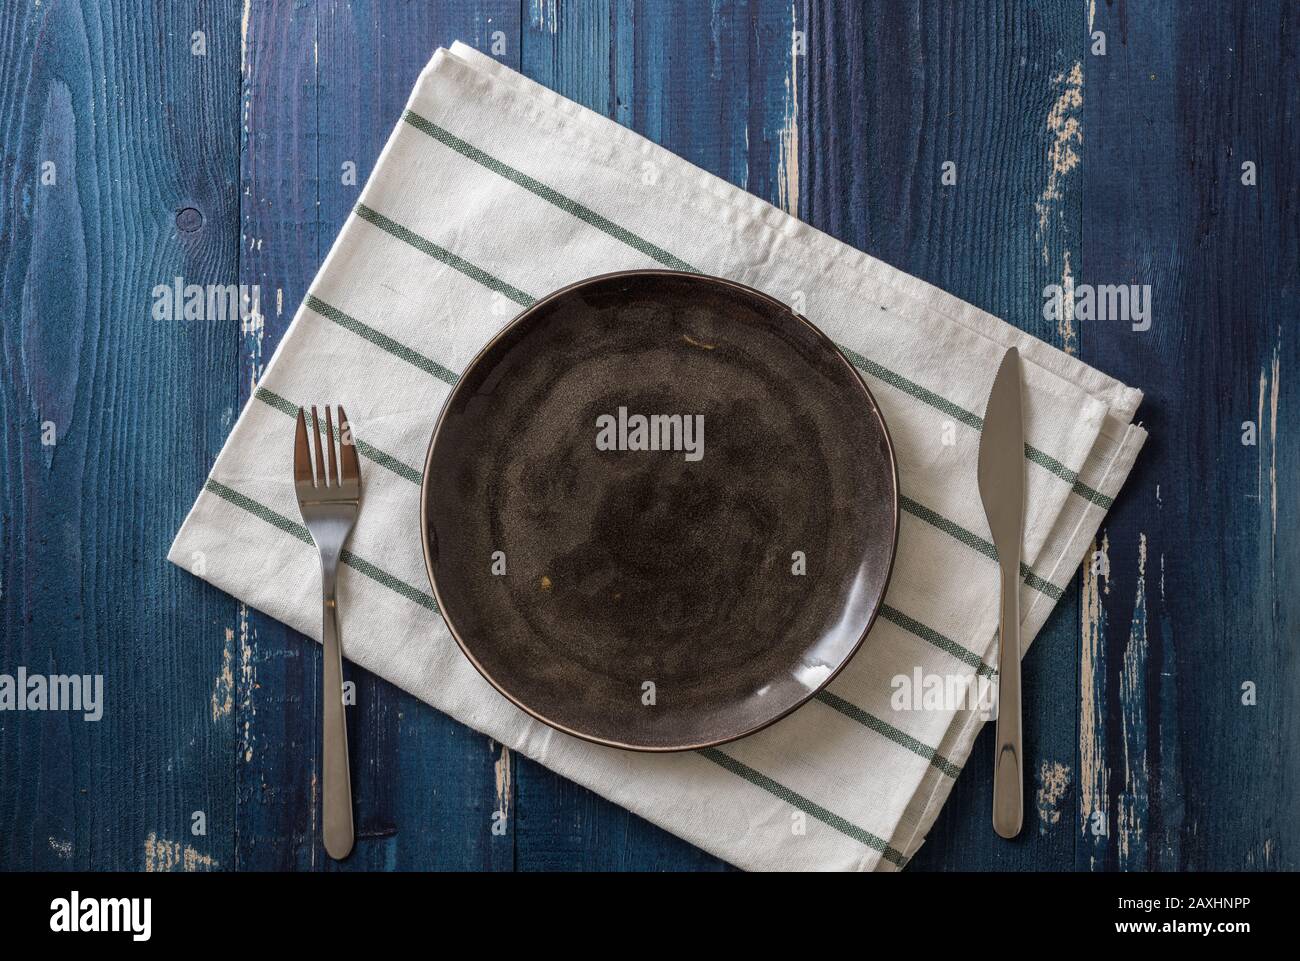 Brown Round Plate with utensils and dish towel on ocean blue wooden table background Stock Photo